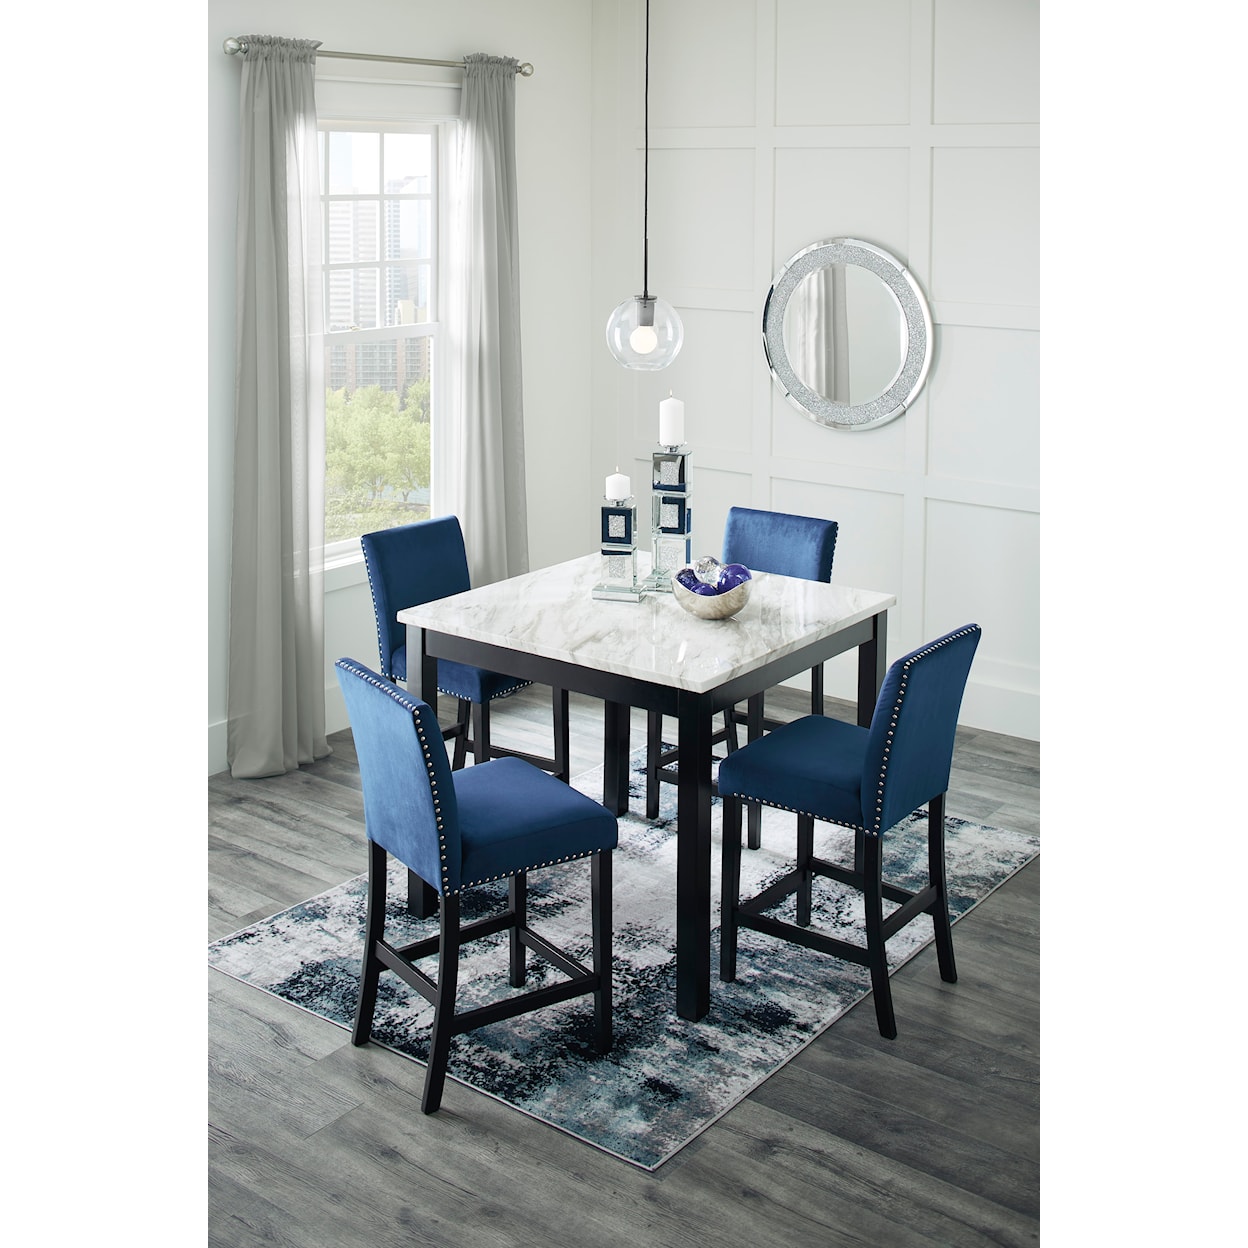 Signature Design by Ashley Furniture Cranderlyn 5-Piece Counter Dining Table Set